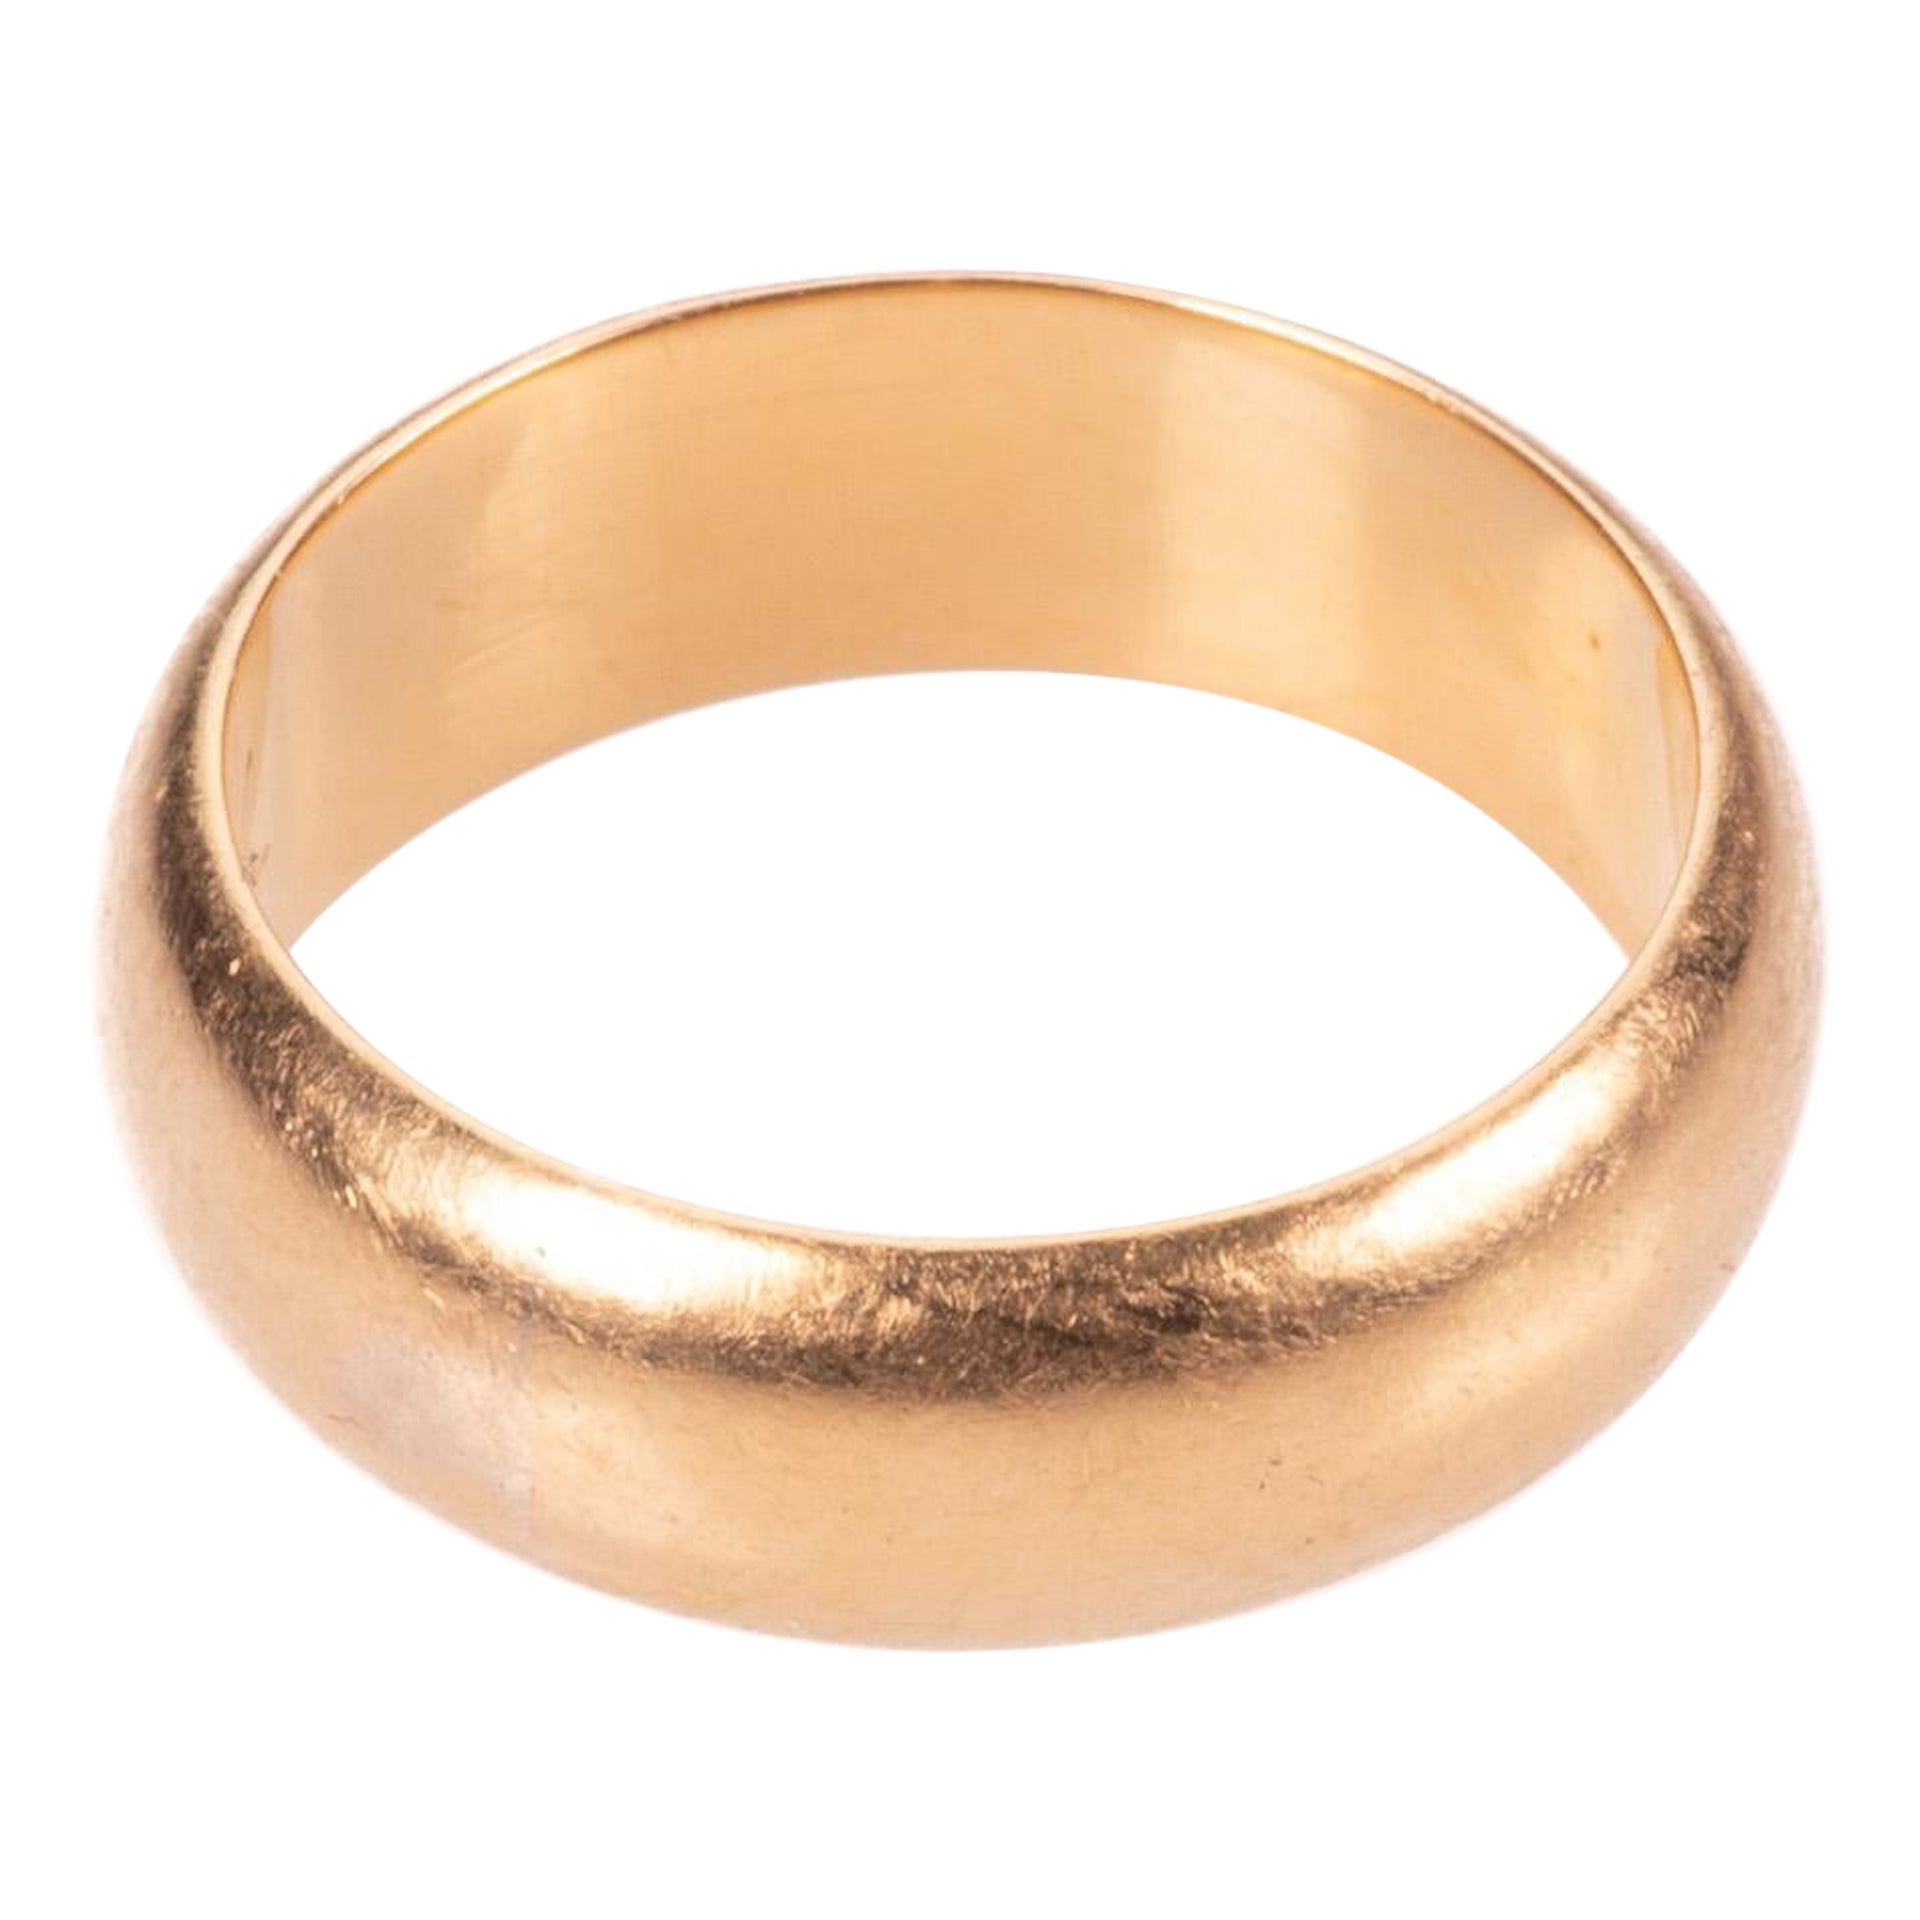 22 Kt Gold Wedding Band Ring For Sale